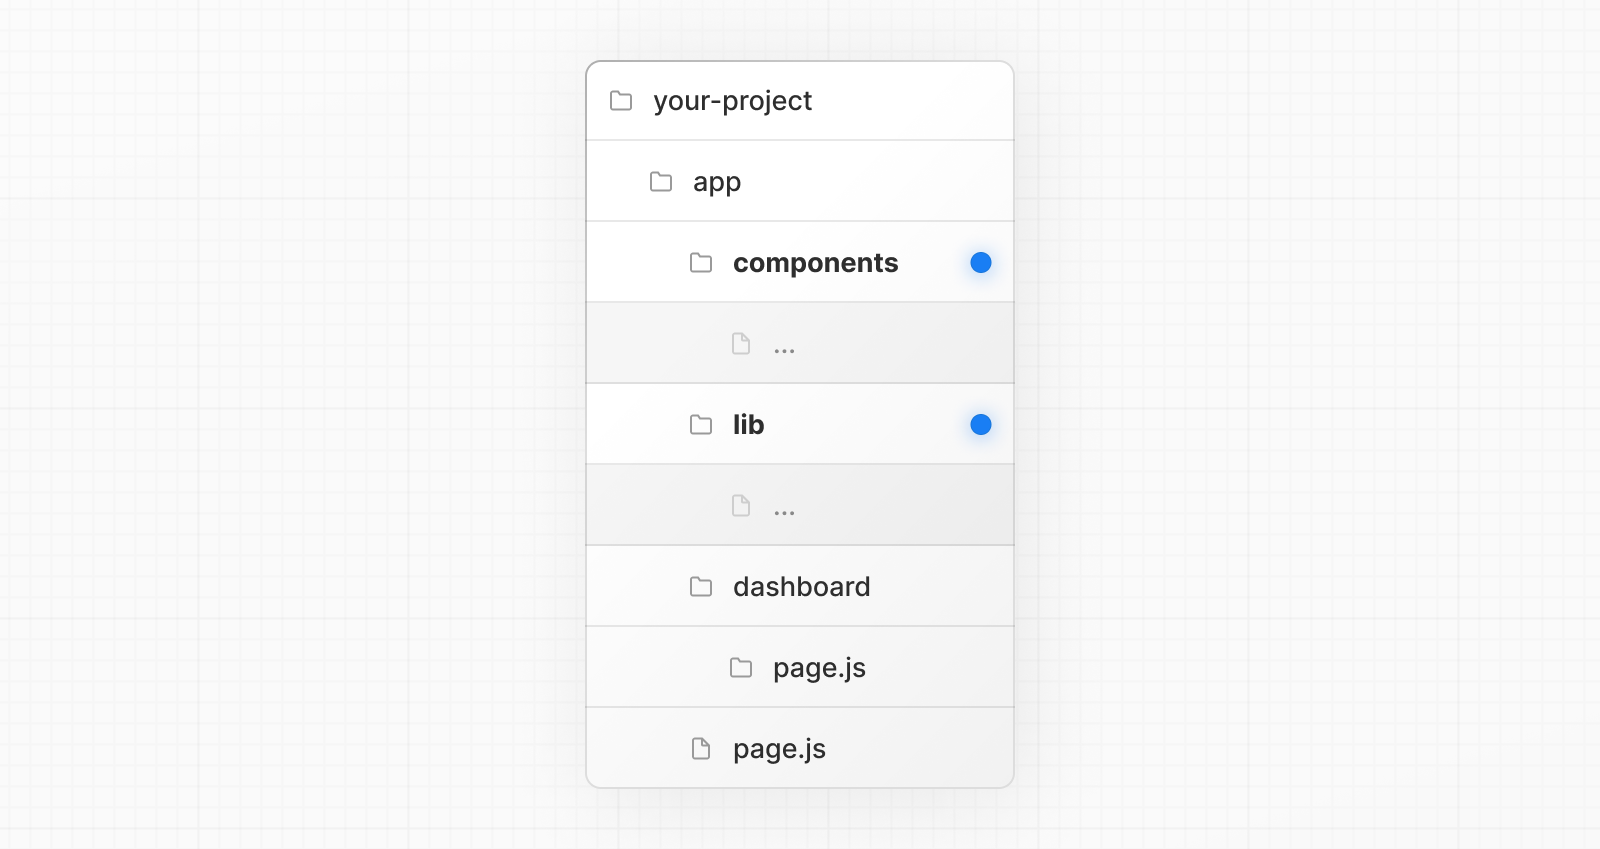 An example folder structure with project files inside app